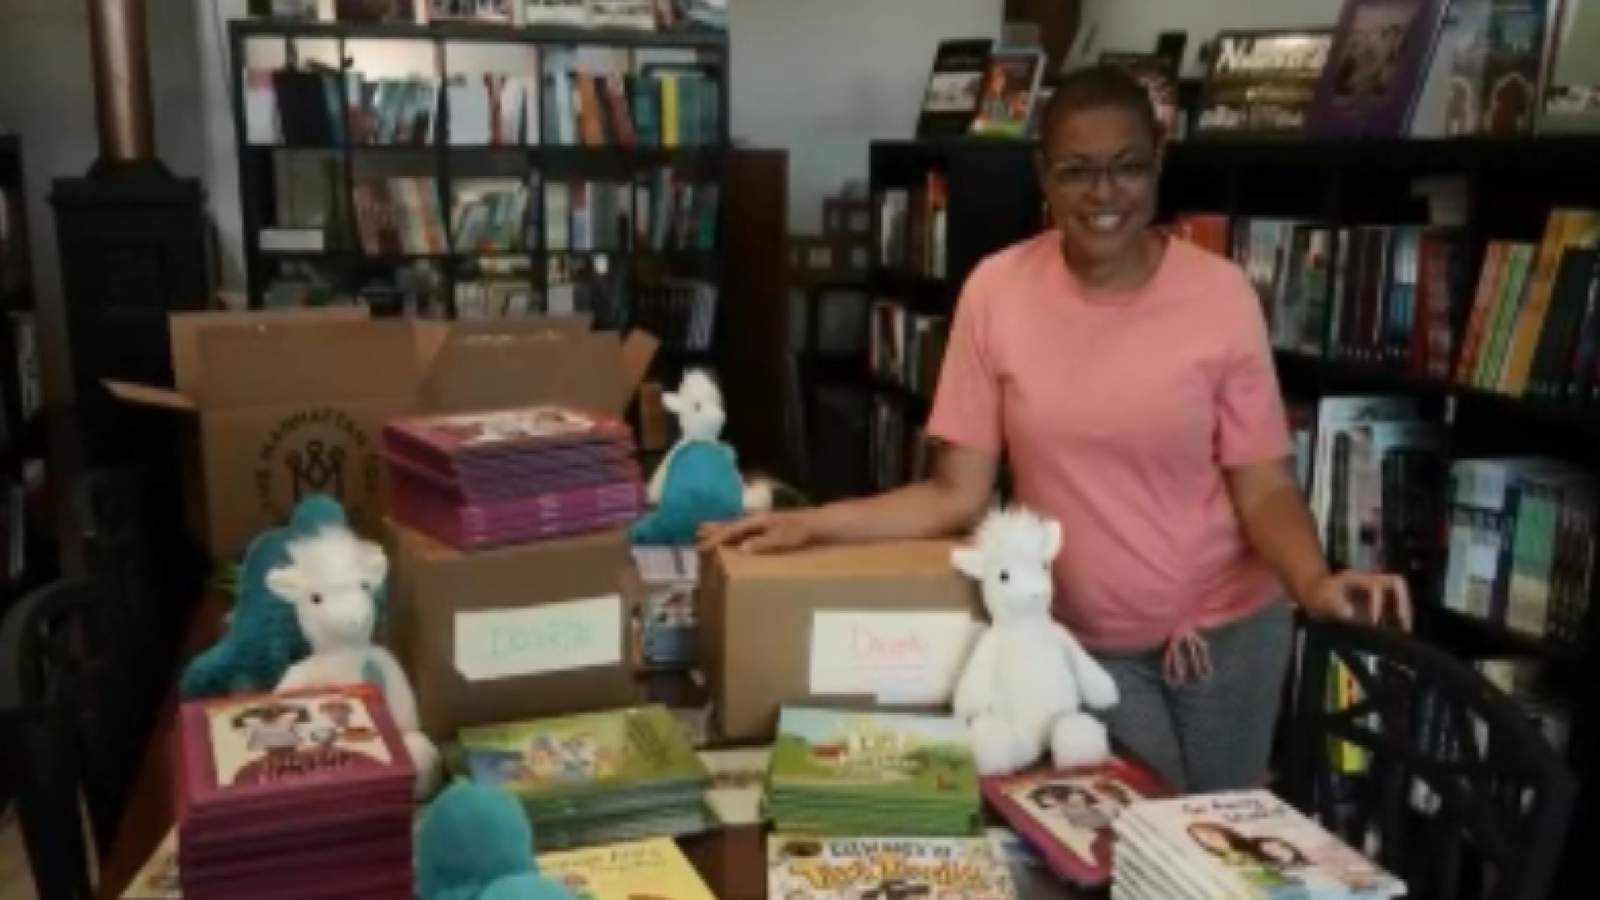 Houston native provides books and toys to children in Lake Charles